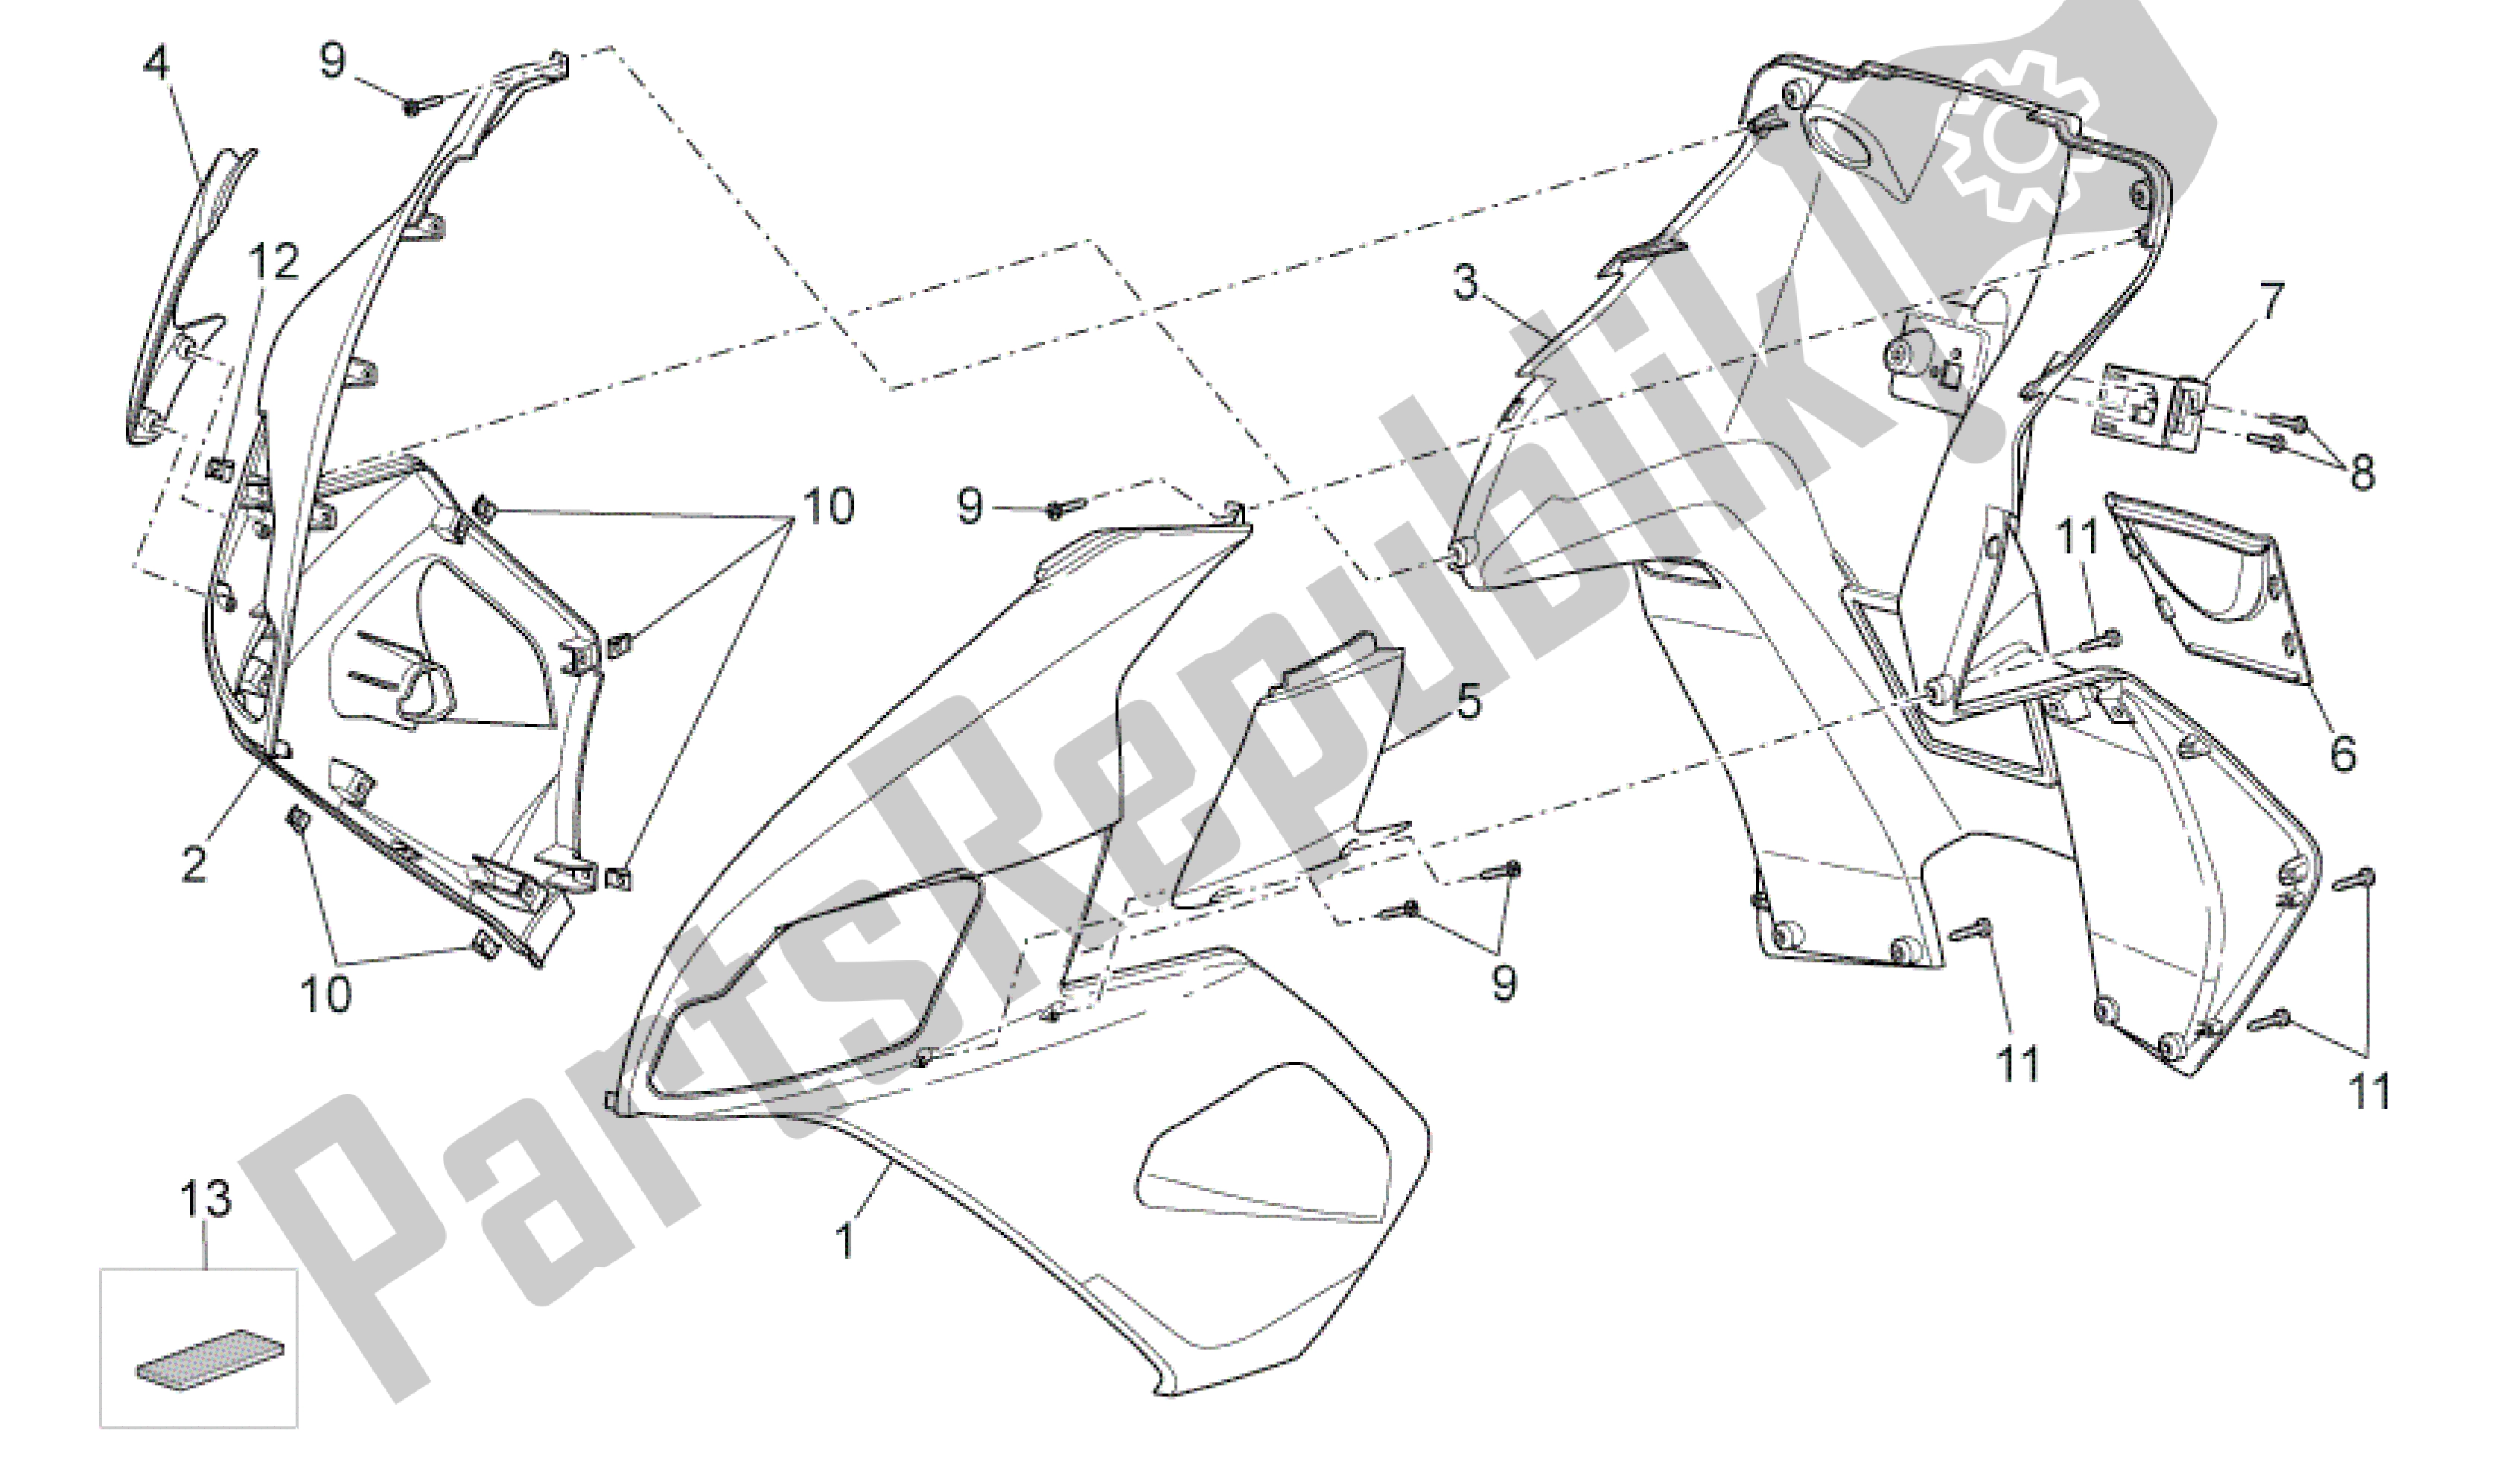 All parts for the Front Body Iii of the Aprilia SR 50 2004 - 2009